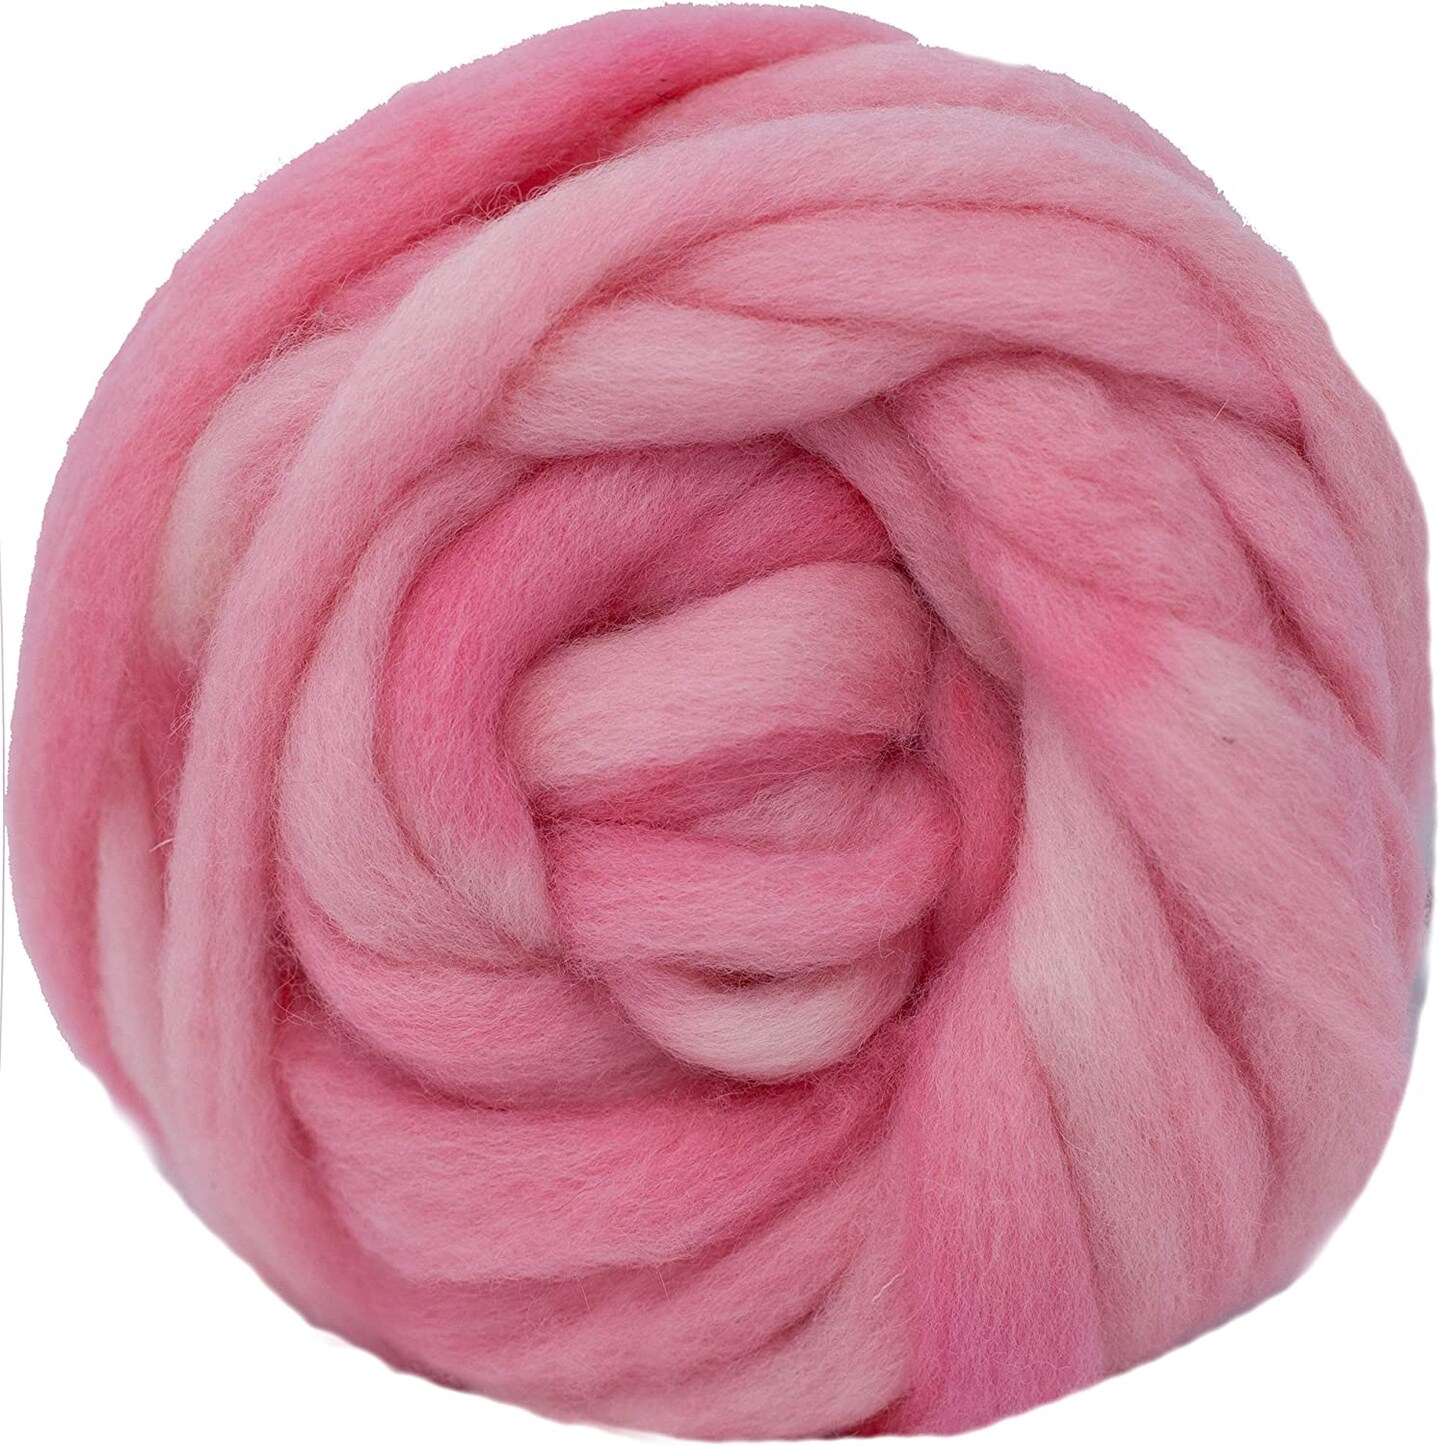 Hand Dyed BFL Wool Roving: Gorgeous tonal colorways for easy needle felting, hand spinning or weaving. Choose 1oz or 4oz